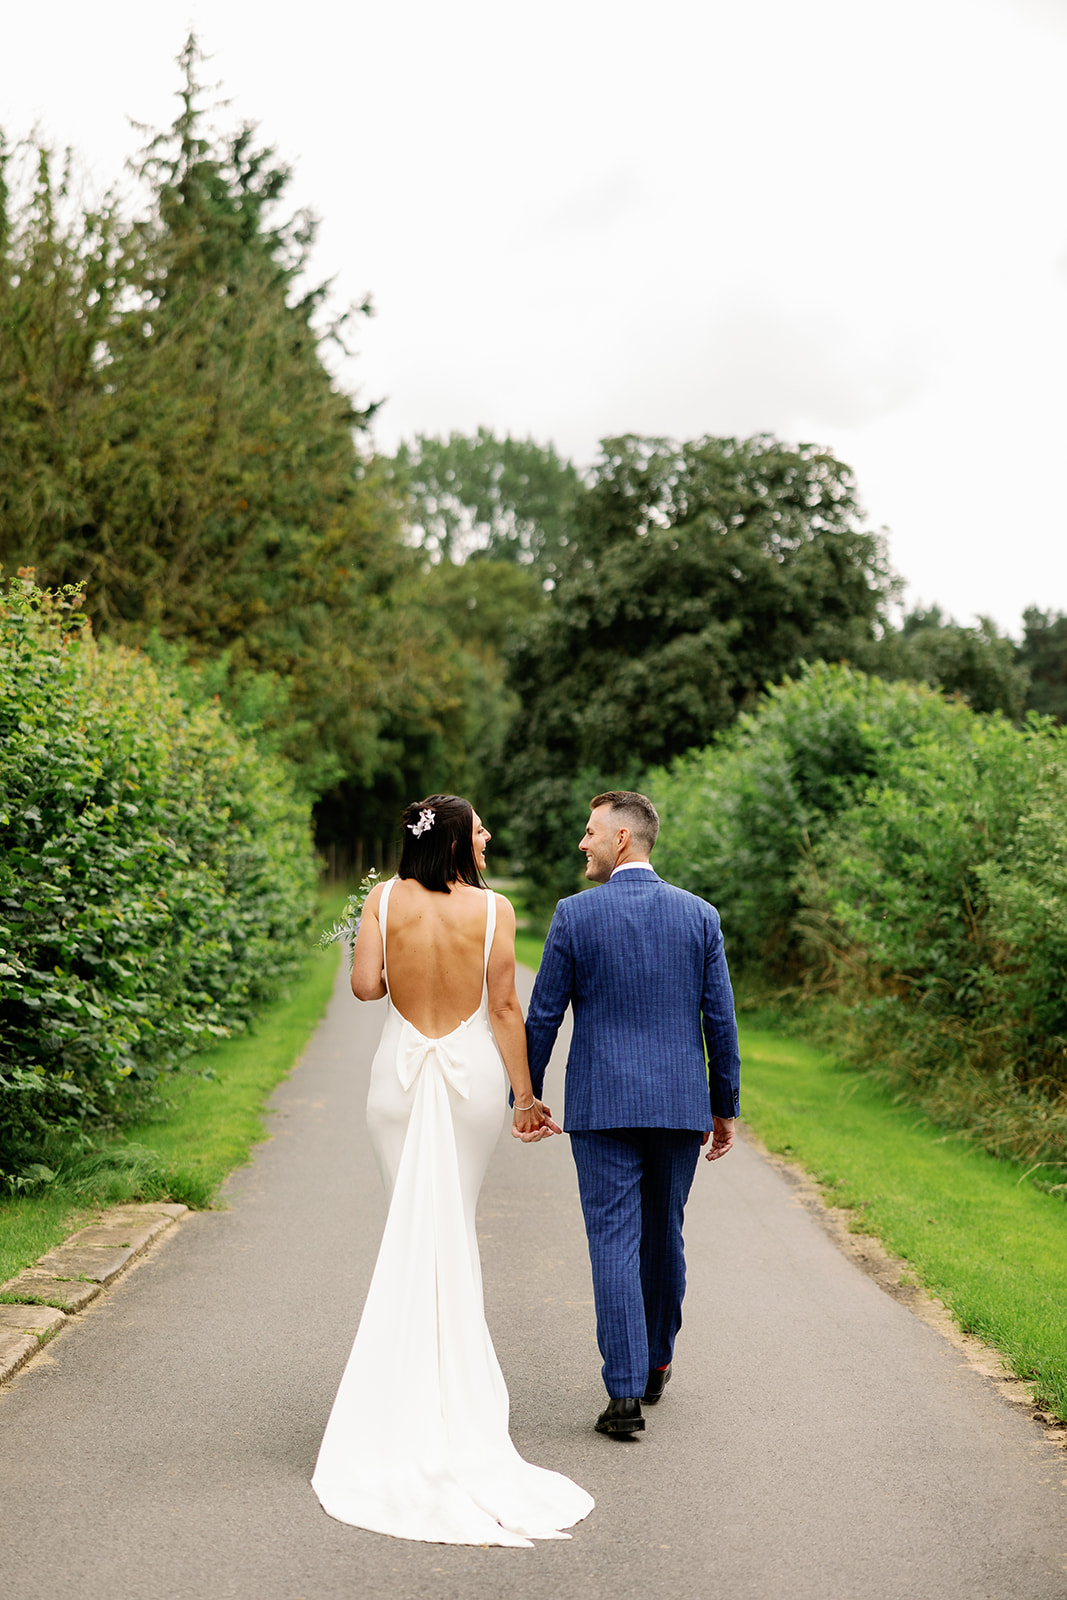 portrait of the bride and groom walking down a country lane